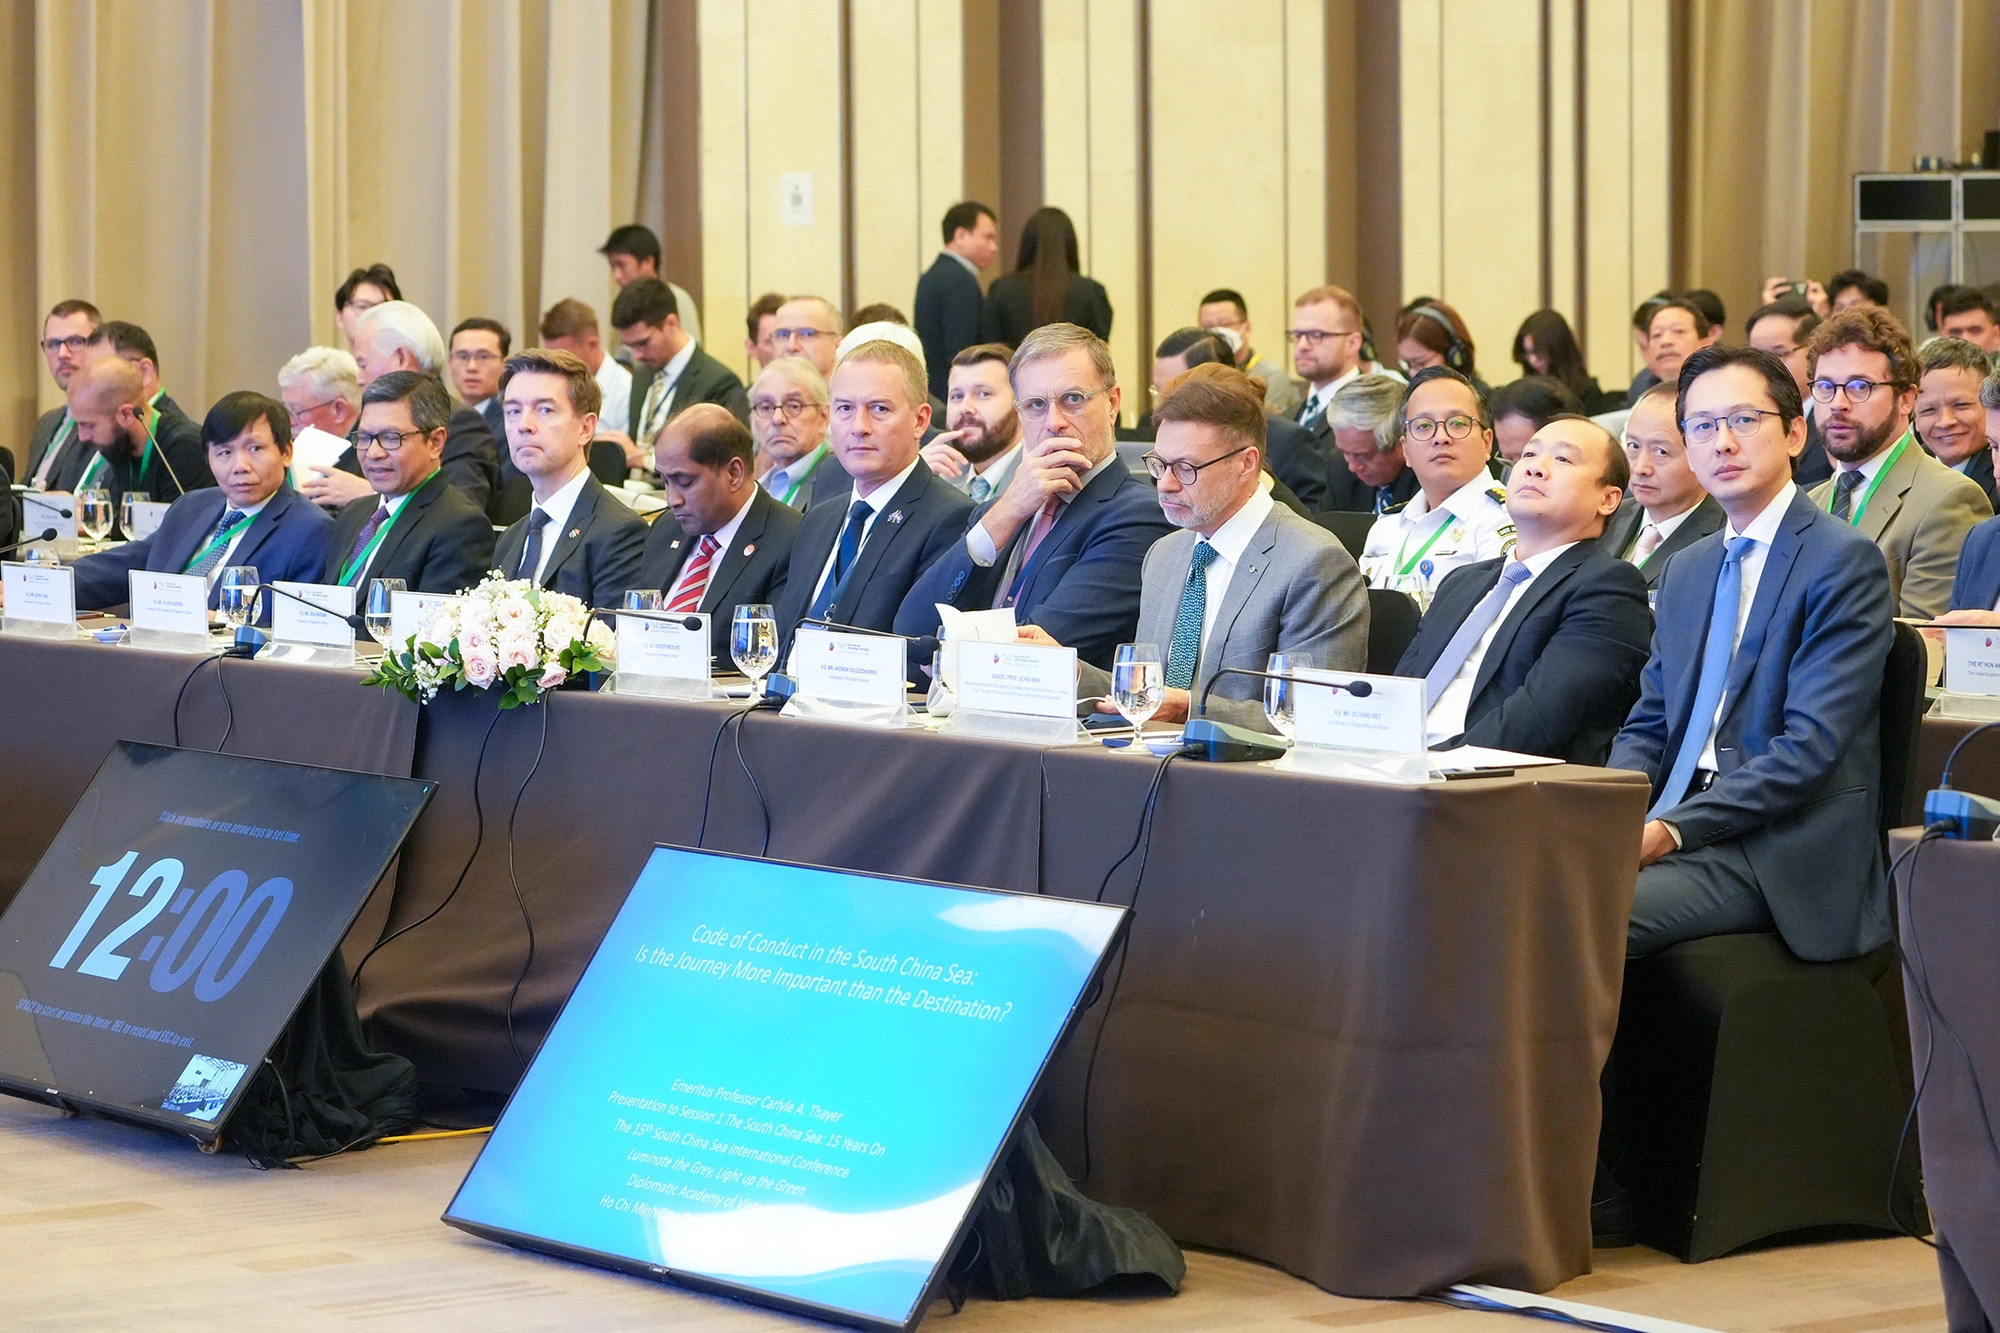 The 15th South China Sea International Conference gathered nearly 50 speakers from some 20 countries and territories as well as roughly 70 delegates from foreign representative offices in Vietnam. Photo: Huu Hanh / Tuoi Tre